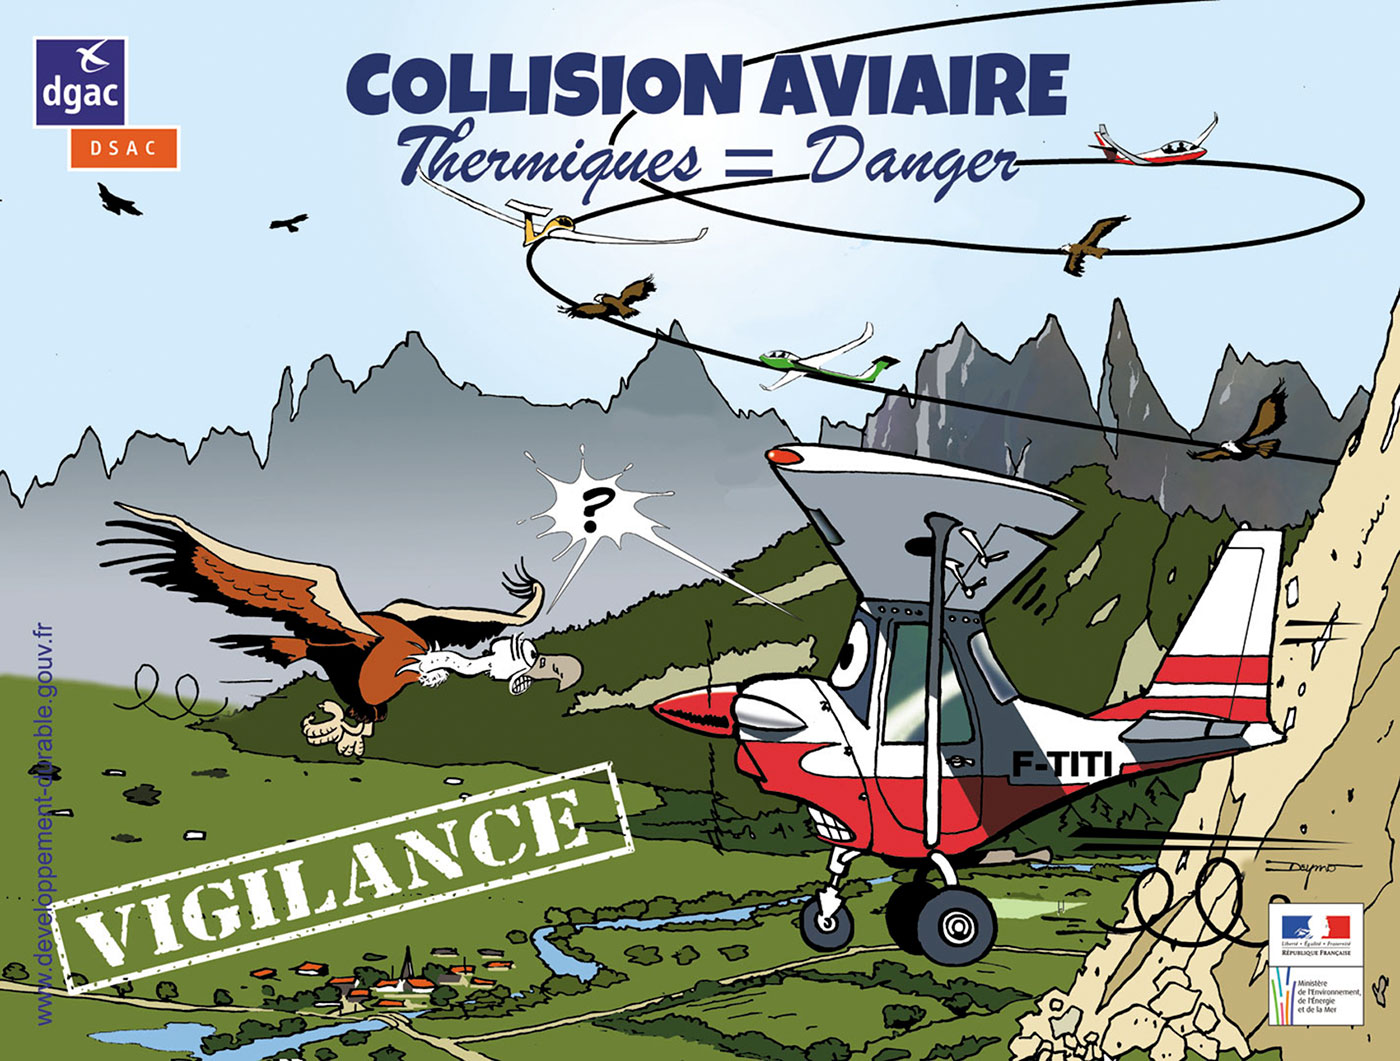 Collisions aviaire - Thermiques